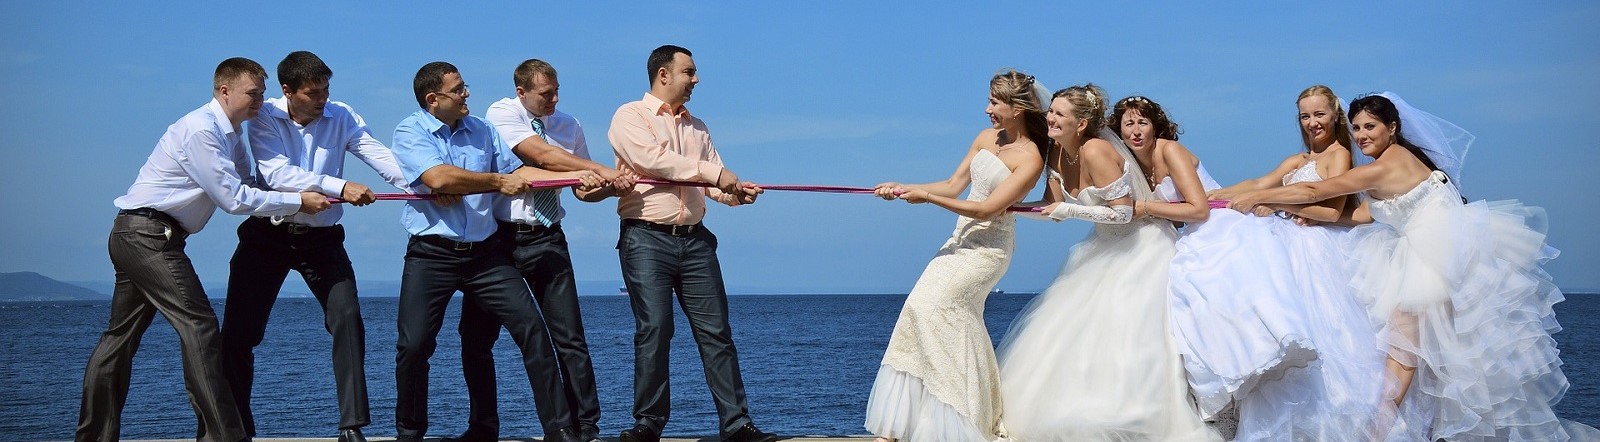 Image by 이리나 김 from Pixabay of groomsmen and bridesmaid tug of rope